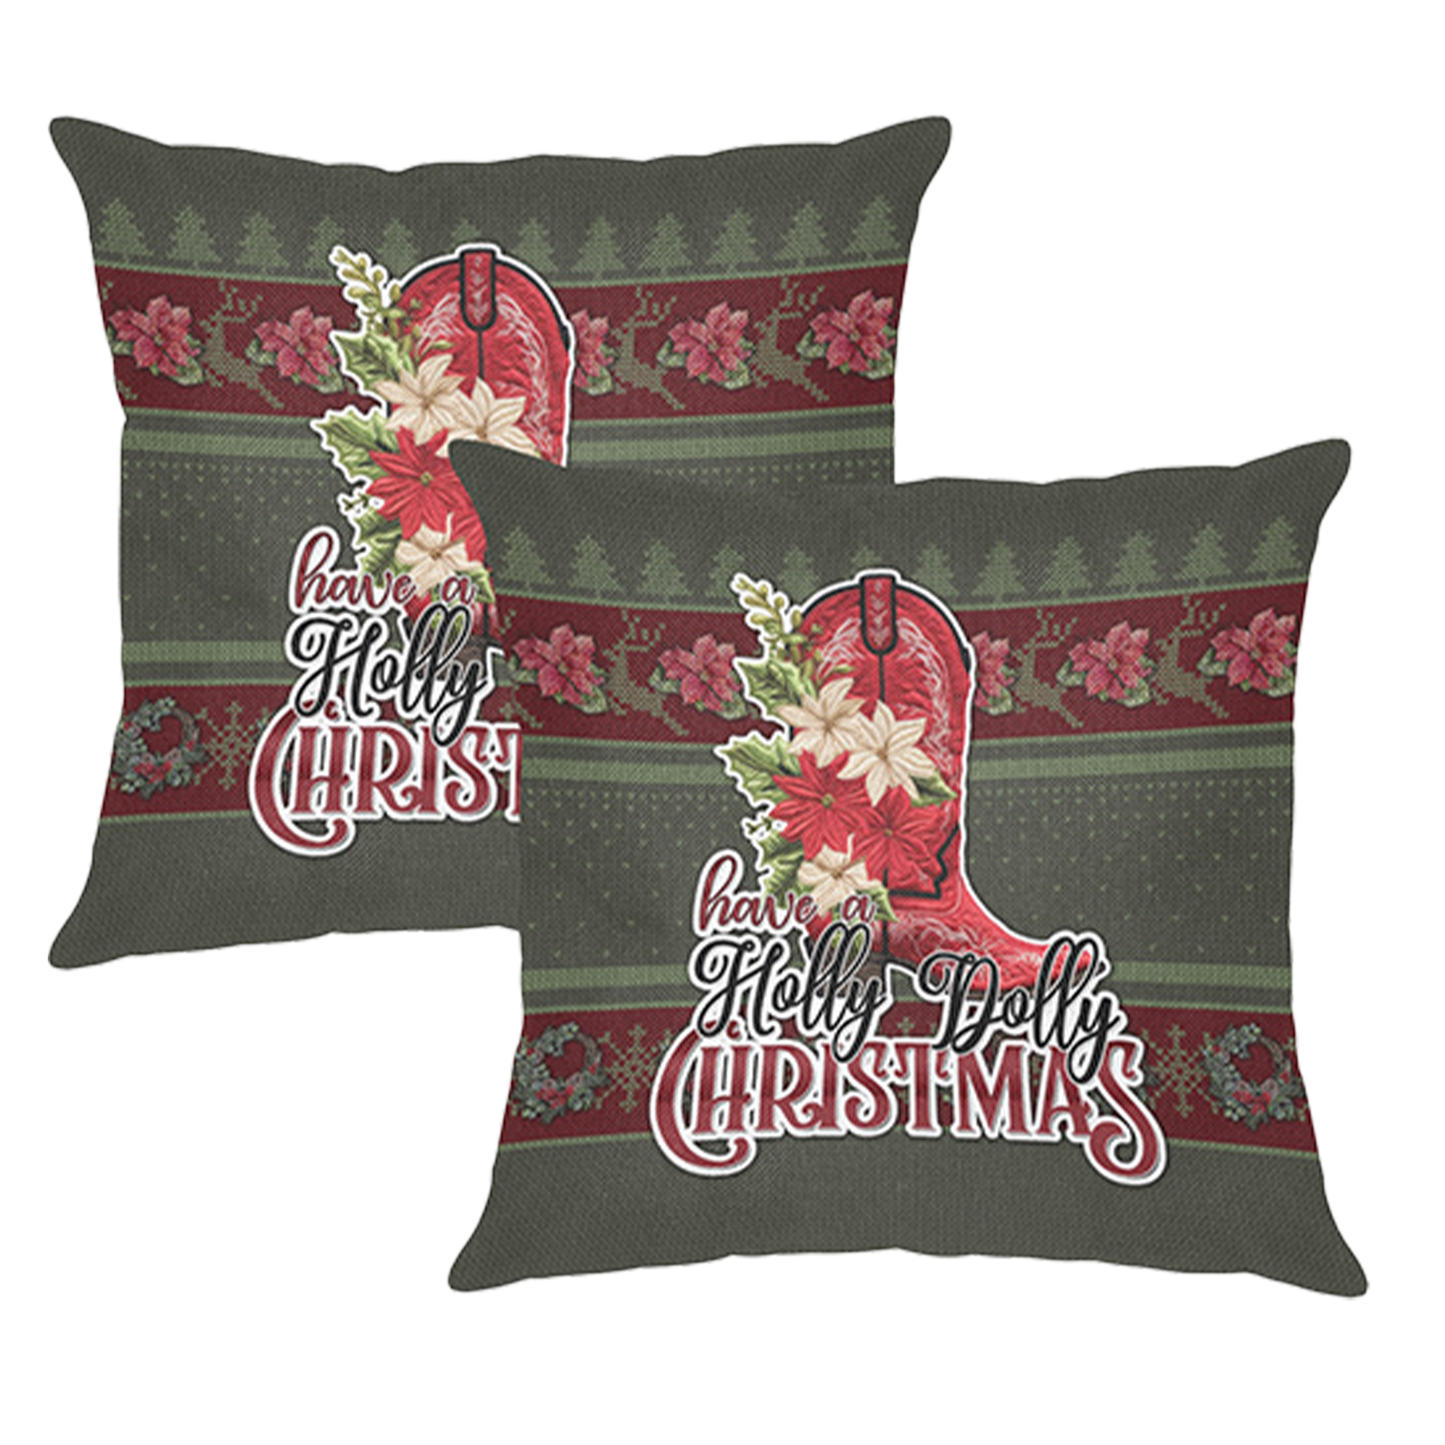 Have a Dolly Christmas Pillow